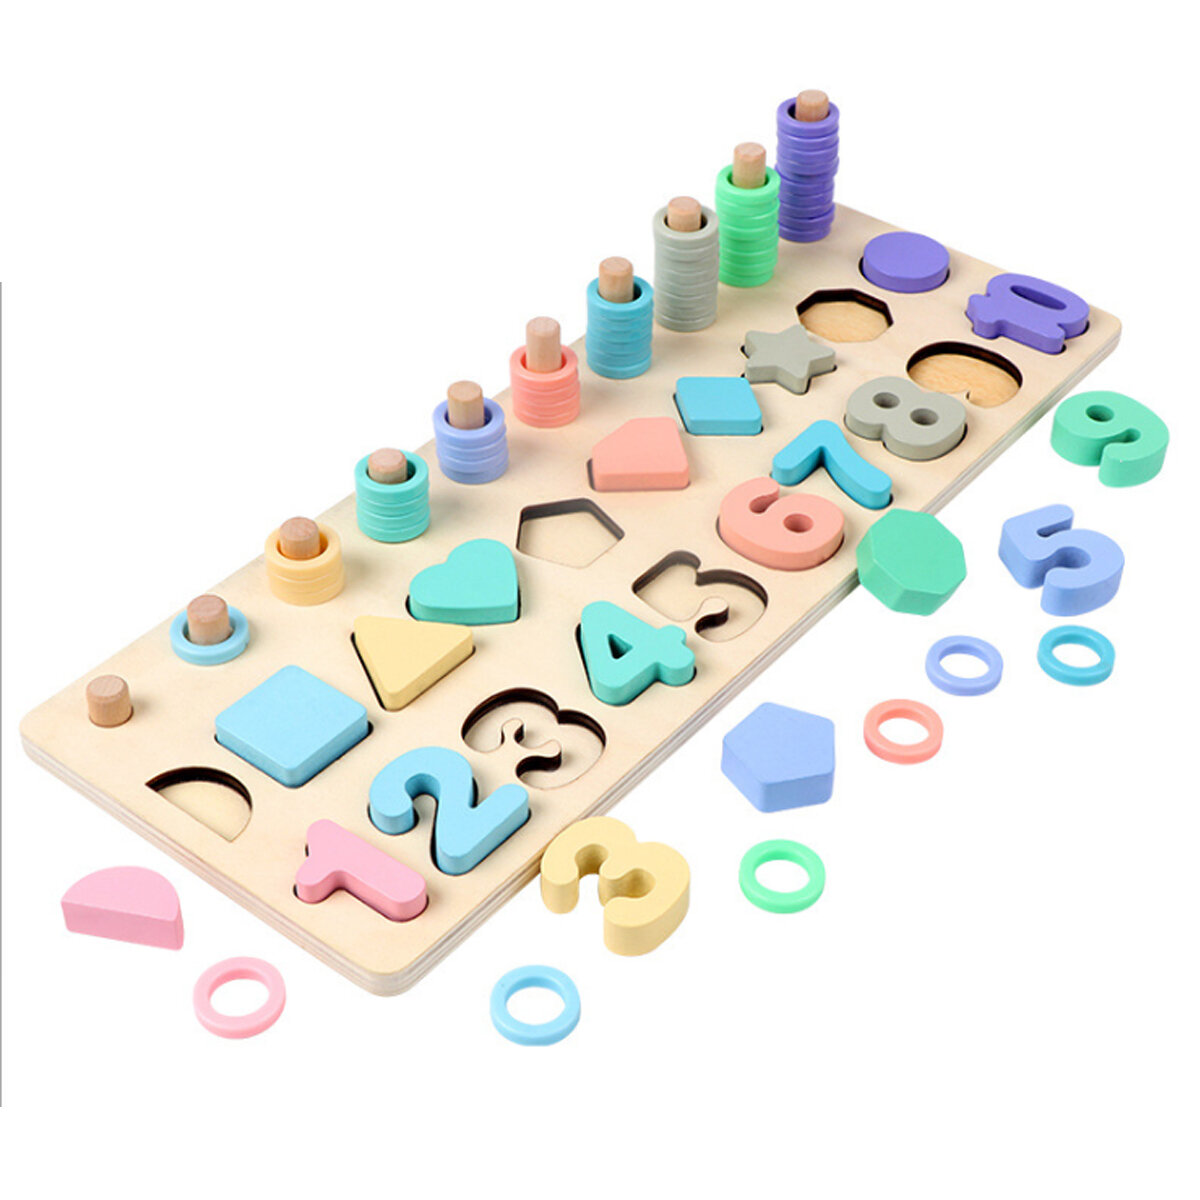 Wooden Magnetic Match Fishing Board Puzzle Toy Set Count Number Matching Digital Shape Early Educati